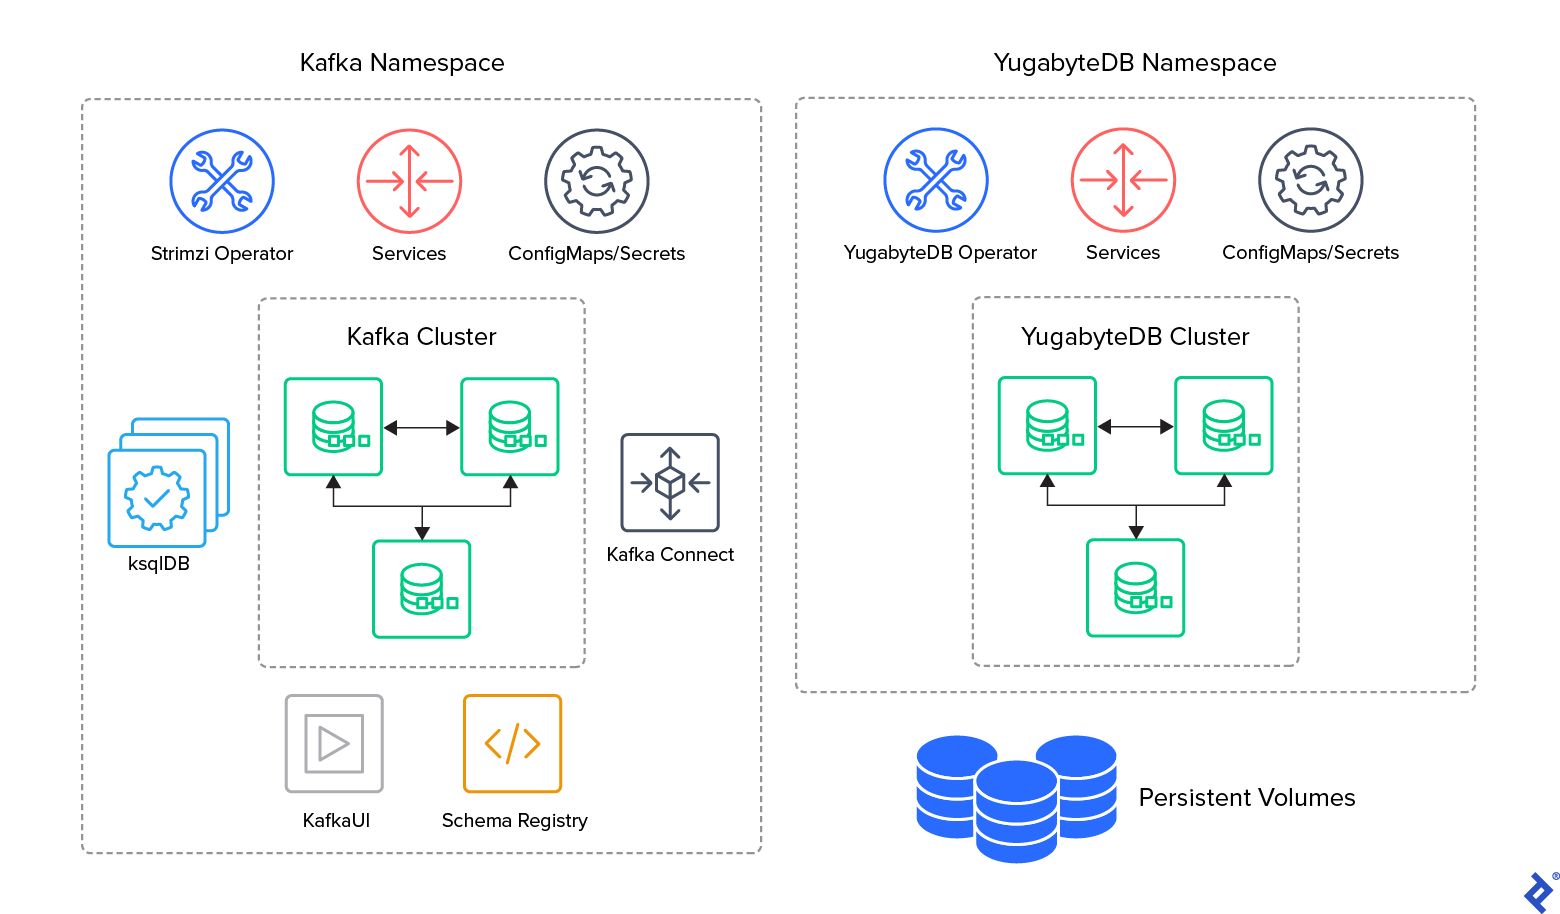 The Kubernetes environment diagram consists of three groups: the Kafka Namespace, the YugabyteDB Namespace, and Persistent Volumes. Within the Kafka Namespace are icons for the Strimzi Operator, Services, ConfigMaps/Secrets, ksqlDB, Kafka Connect, KafkaUI, the Schema Registry, and our Kafka Cluster. The Kafka Cluster contains a flowchart with three processes. Within the Yugabyte namespace are icons for the YugabyteDB Operator, Services, ConfigMaps/Secrets. The YugabyteDB cluster contains a flowchart with three processes. Persistent Volumes is shown as a separate grouping at the bottom right.